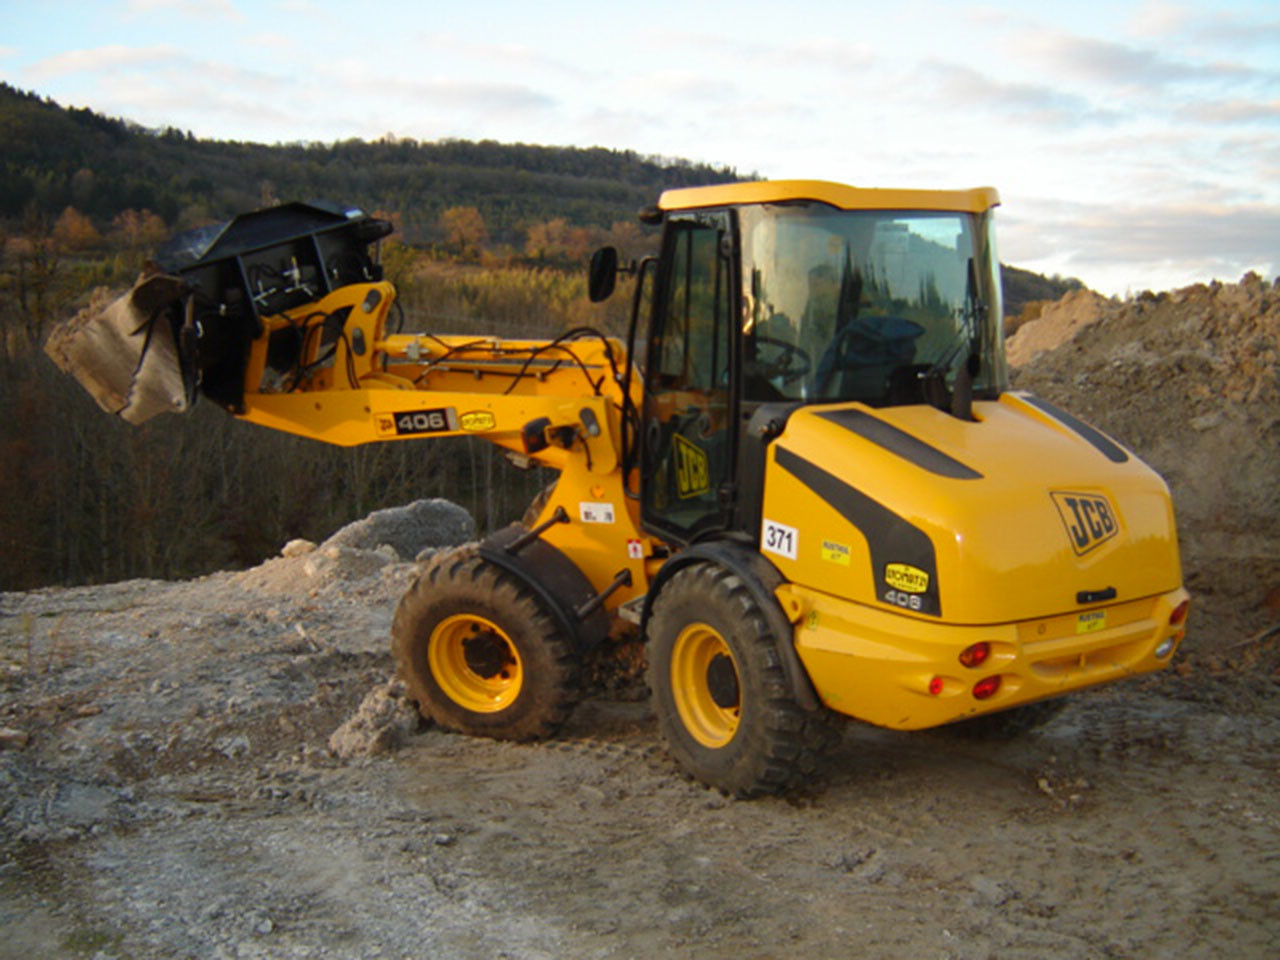 La pala gommata Jcb compie 50 anni 1680x1260_1558611441_2005---the-406-compact-loader-wih-new-parallel-lift-geometry-was-introduced